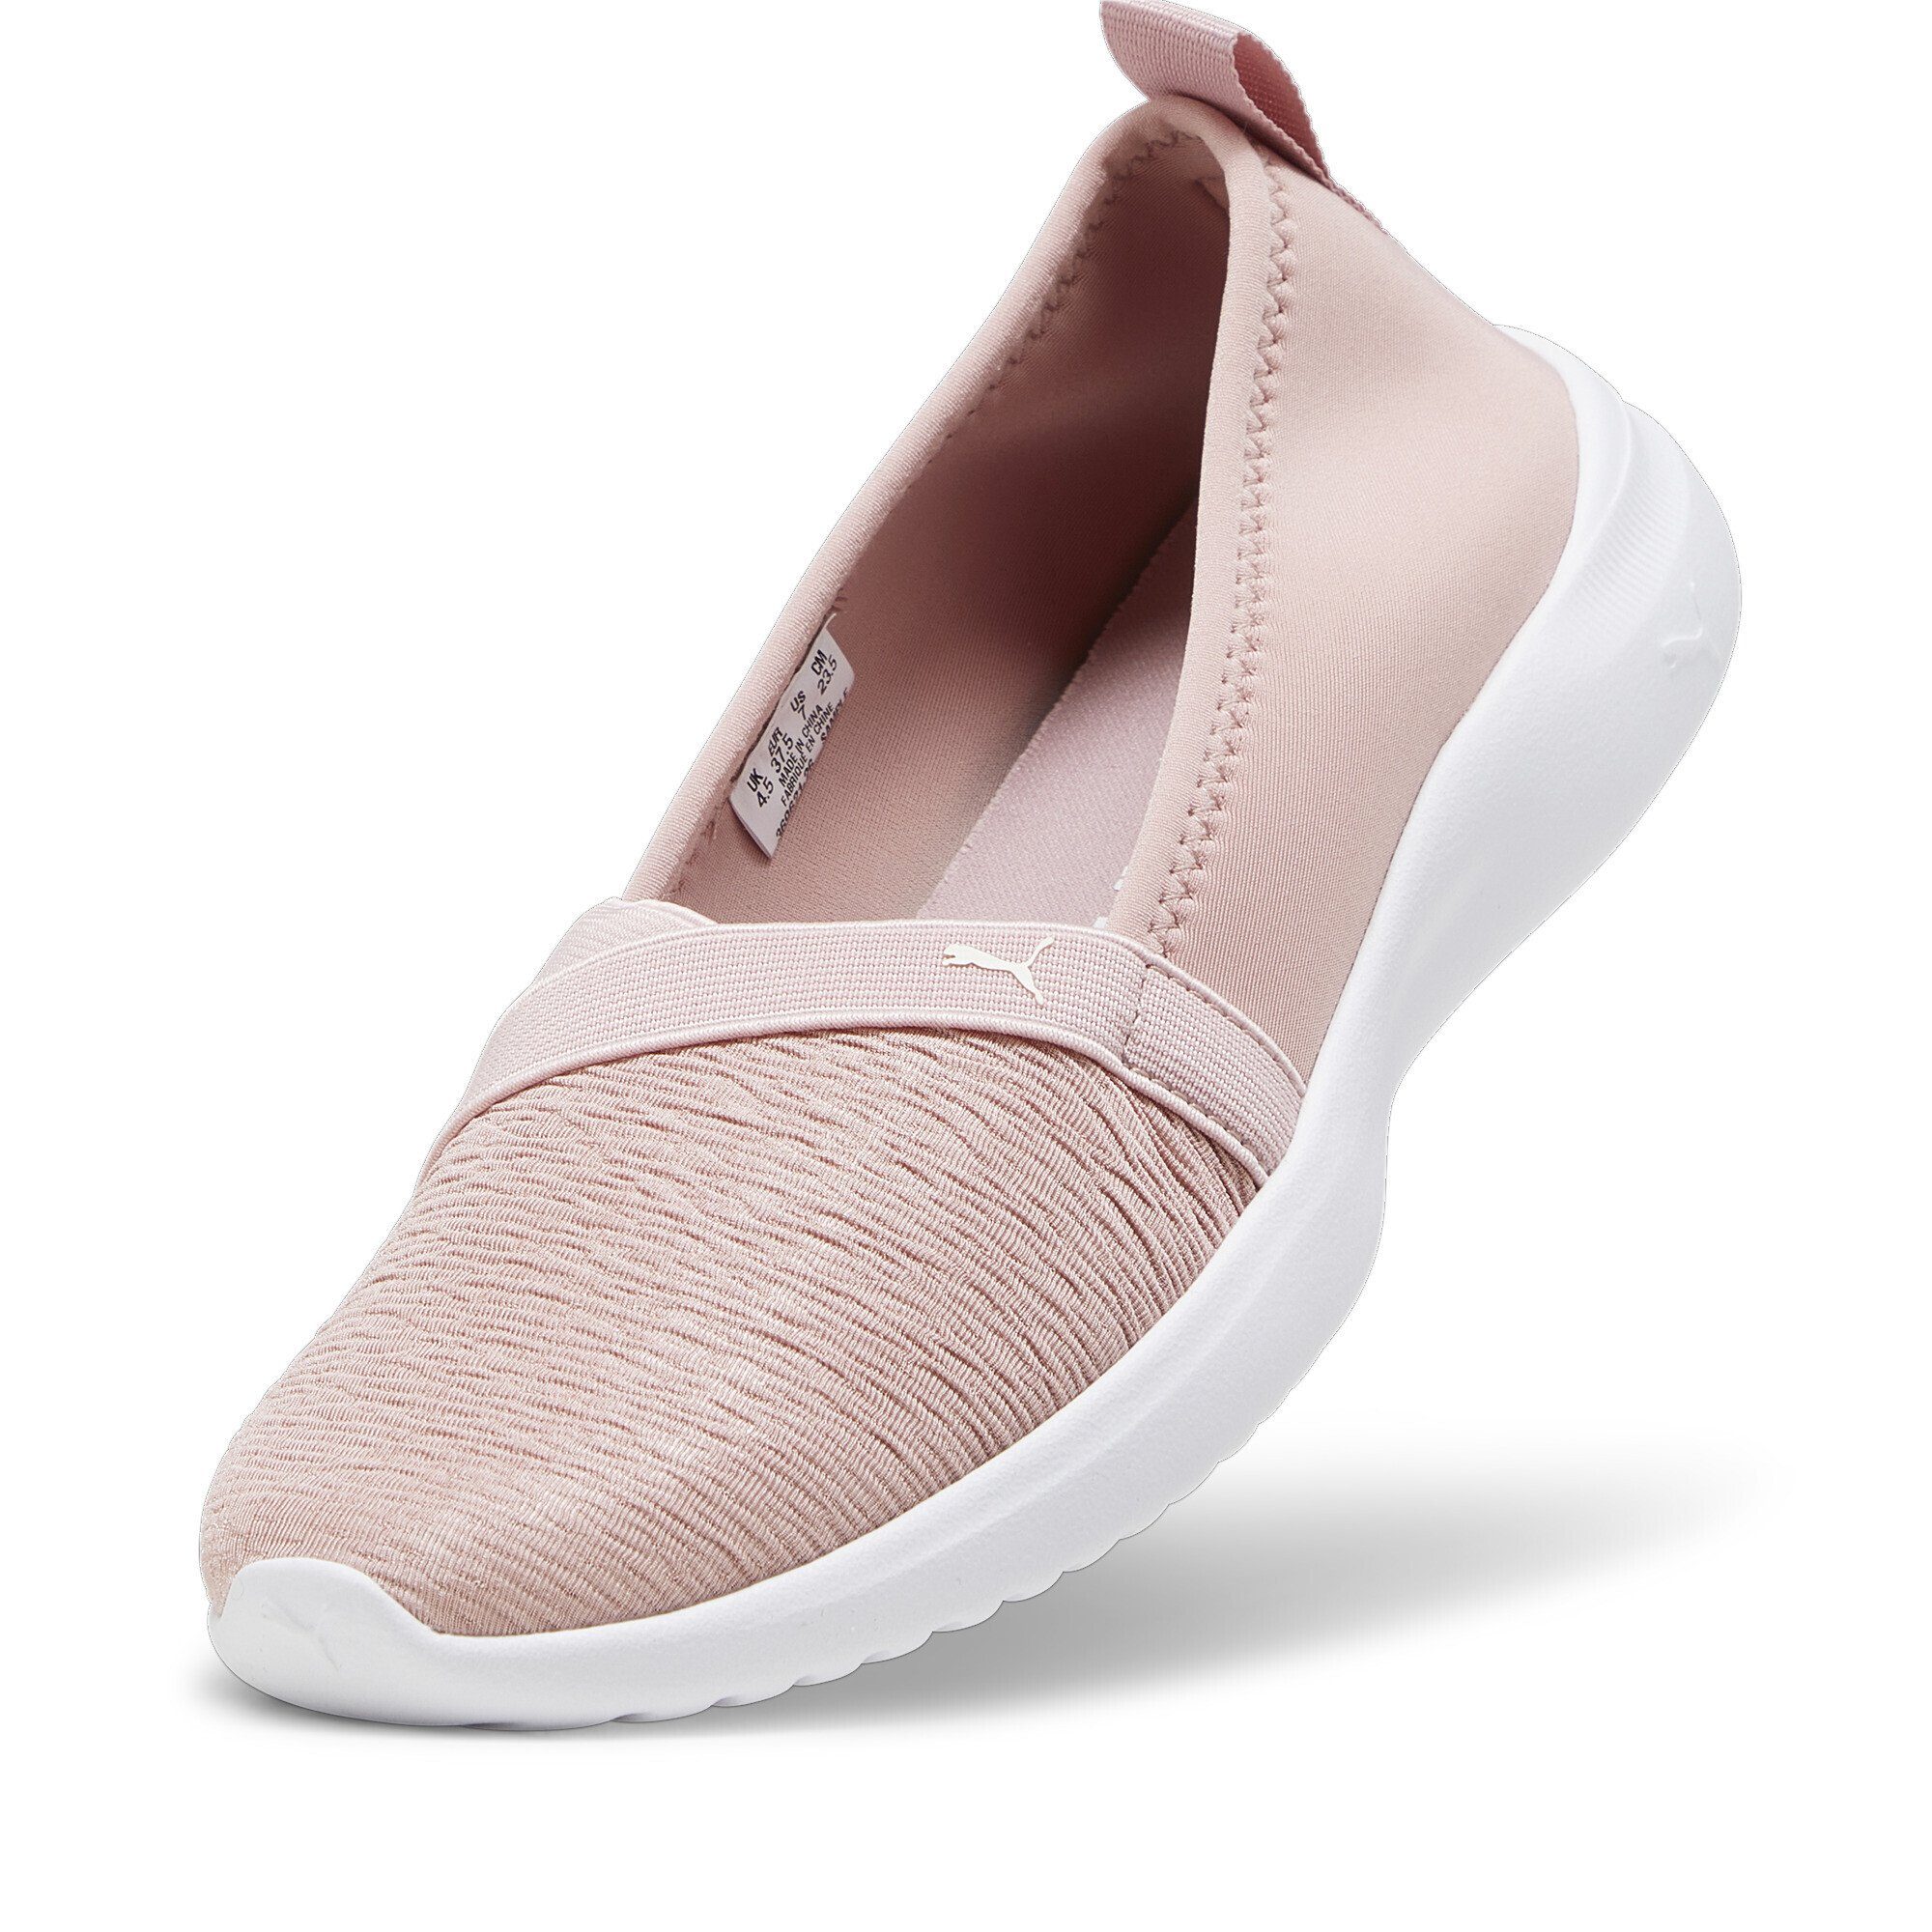 PUMA Adelina Sneakers Damen Frosted Future White Ivory Pink Trainingsschuh